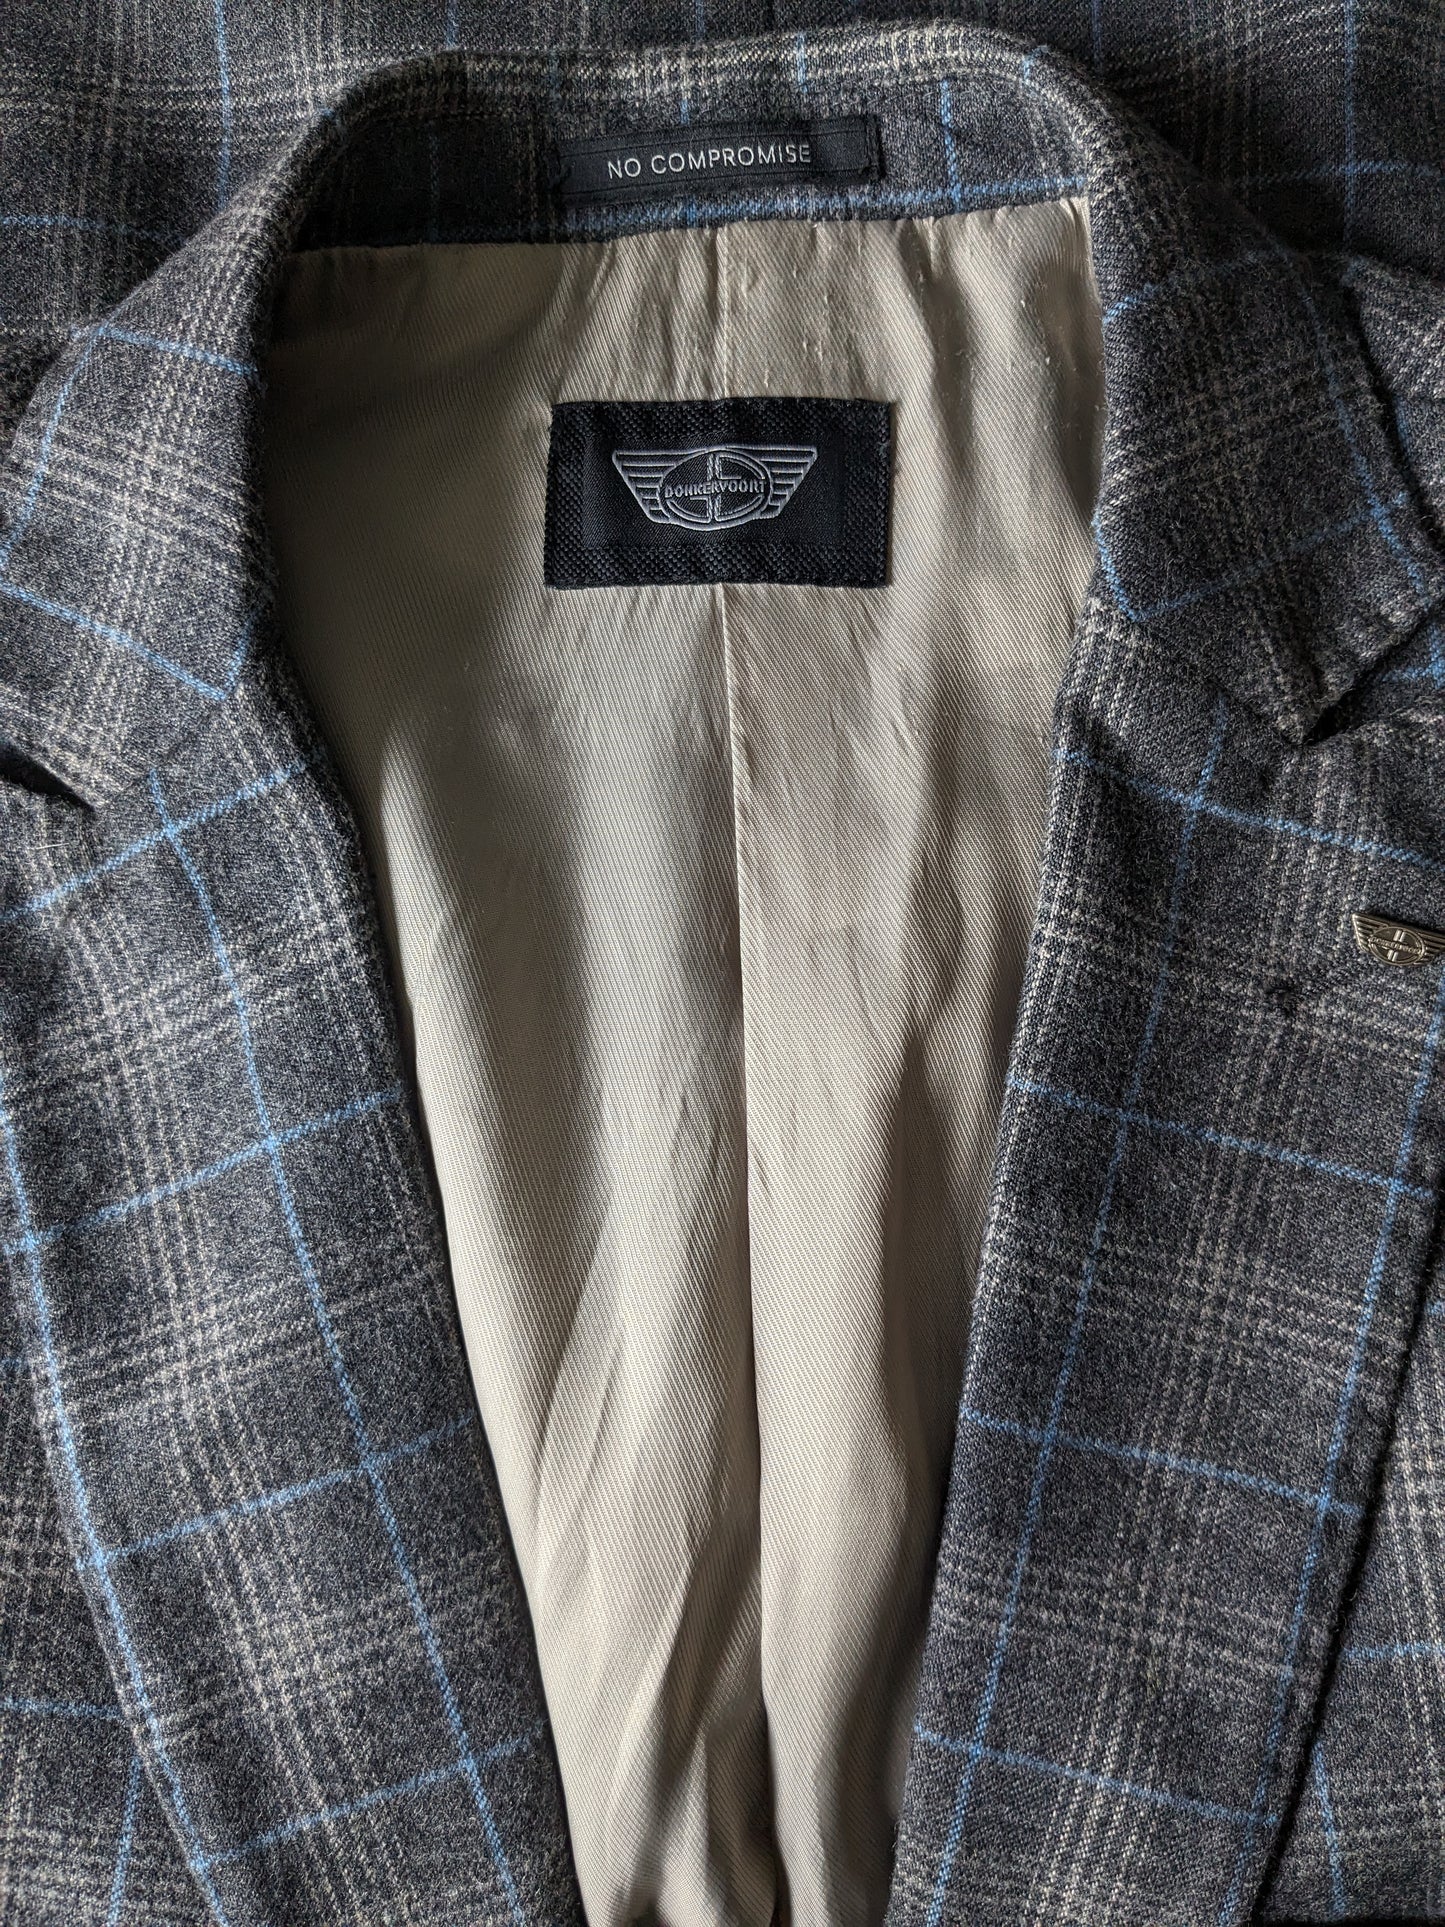 Donkervoort Woolen Colbert. Gray blue checked. Size 54 / L. 50% Wool.